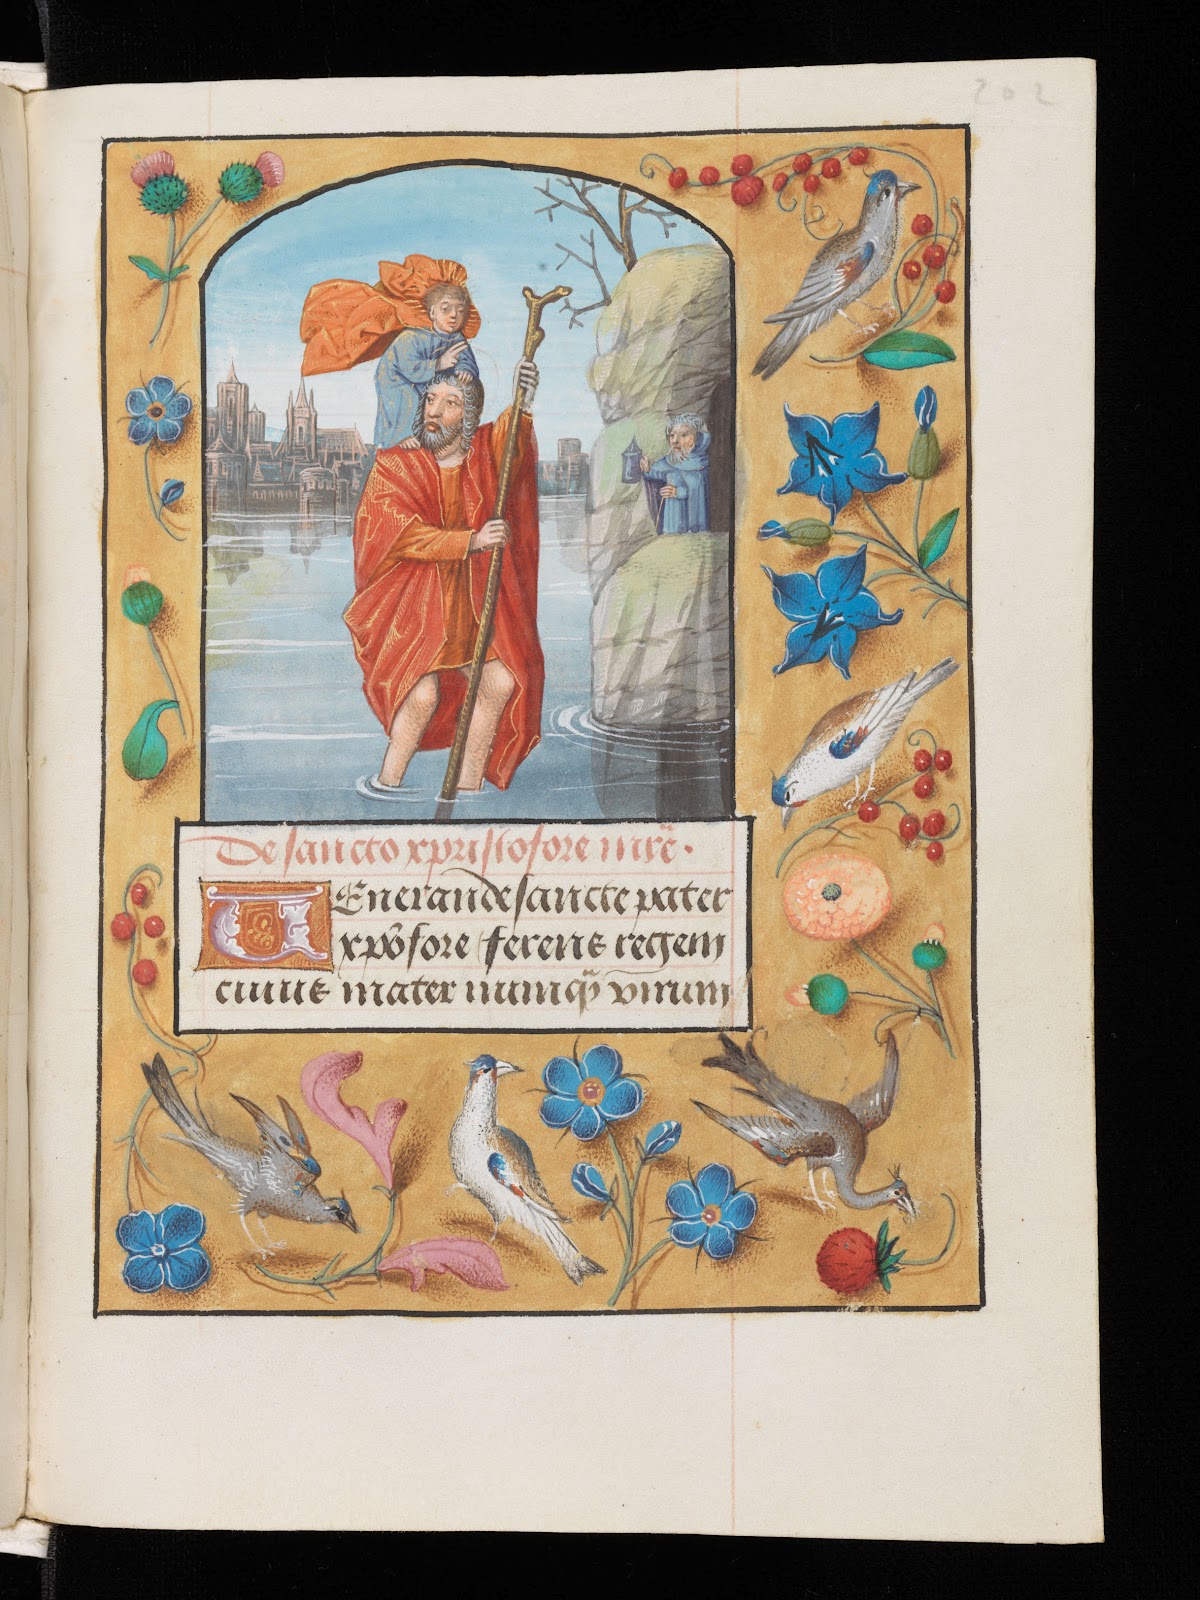 Ancient Manuscripts and Rare Medieval Books: The Book of Hours ... - Bpun A0028 202r